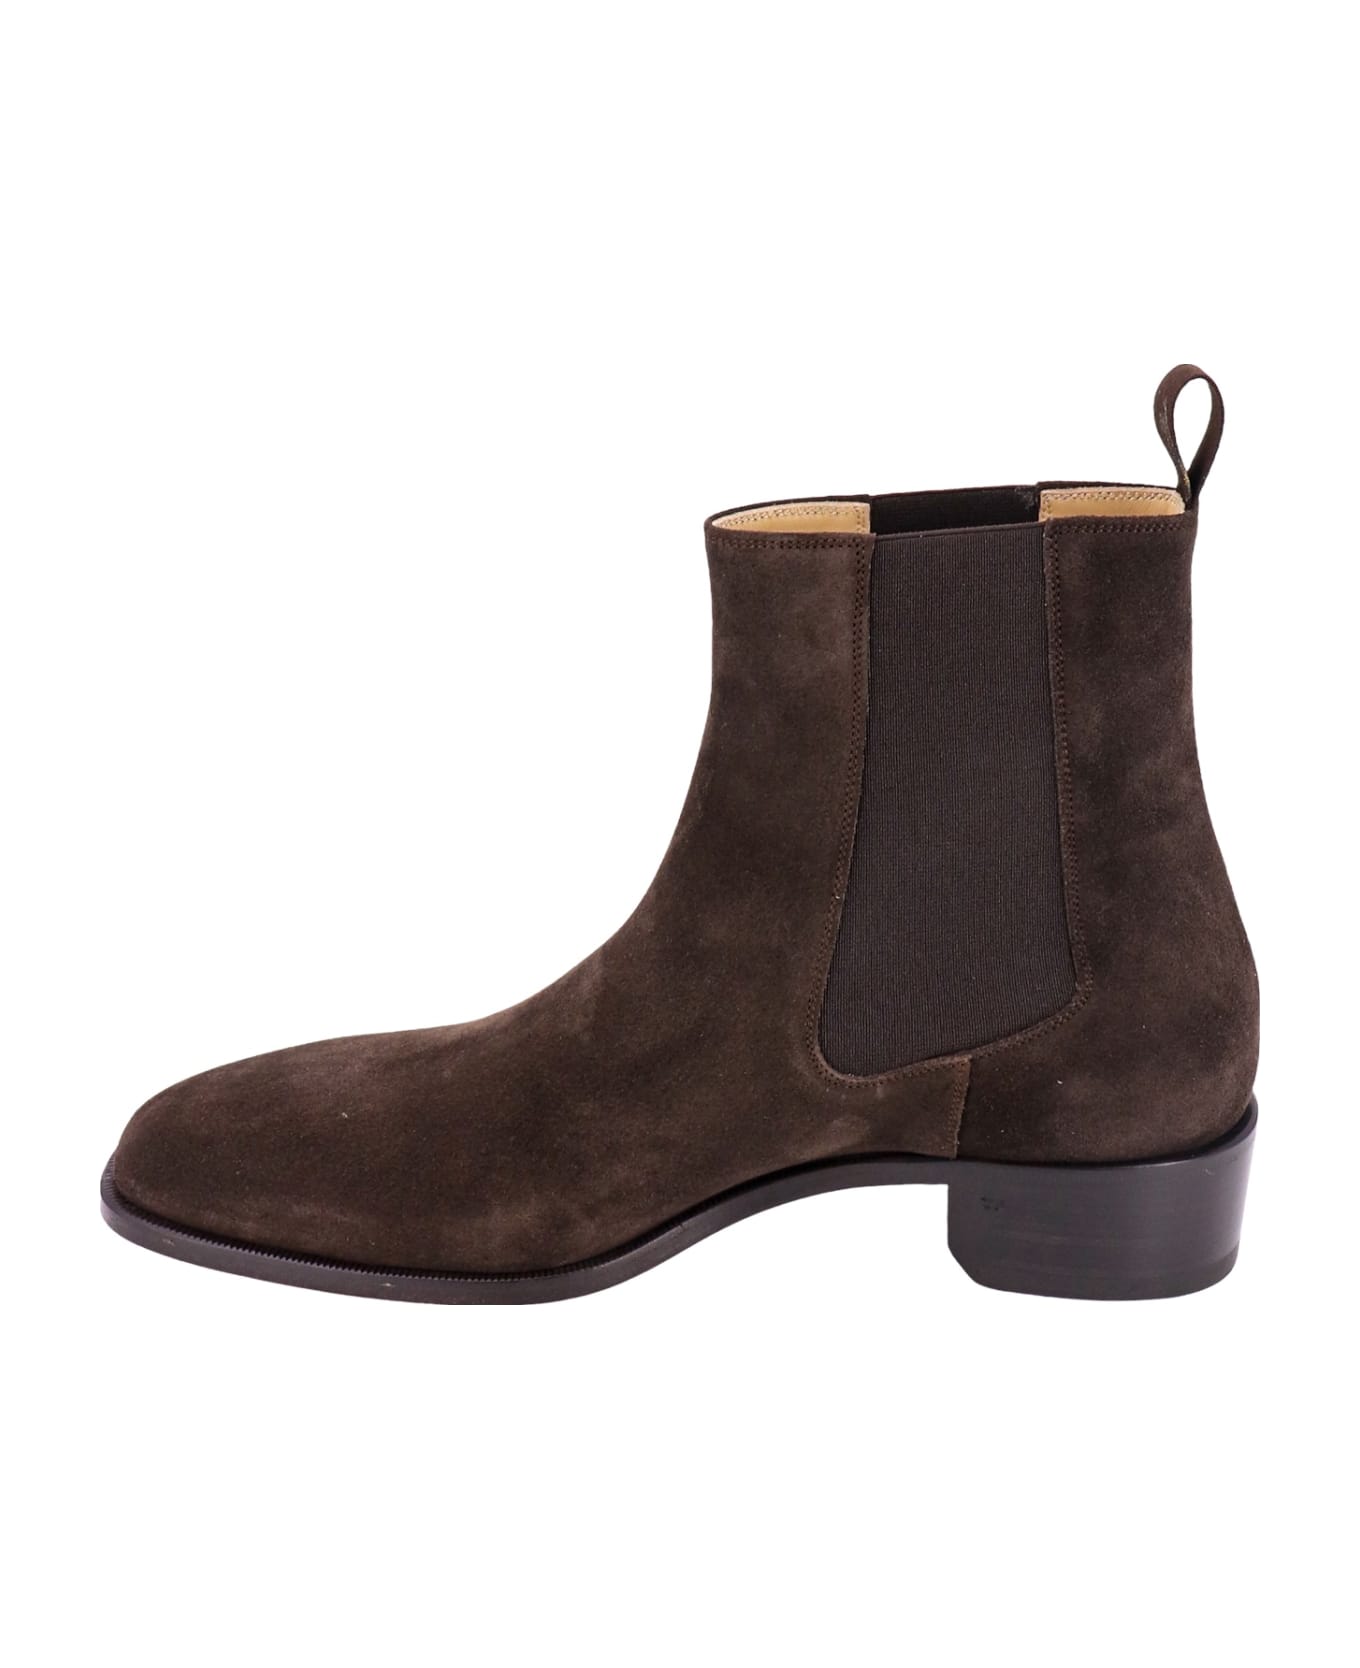 Tom Ford Boots - Brown ブーツ